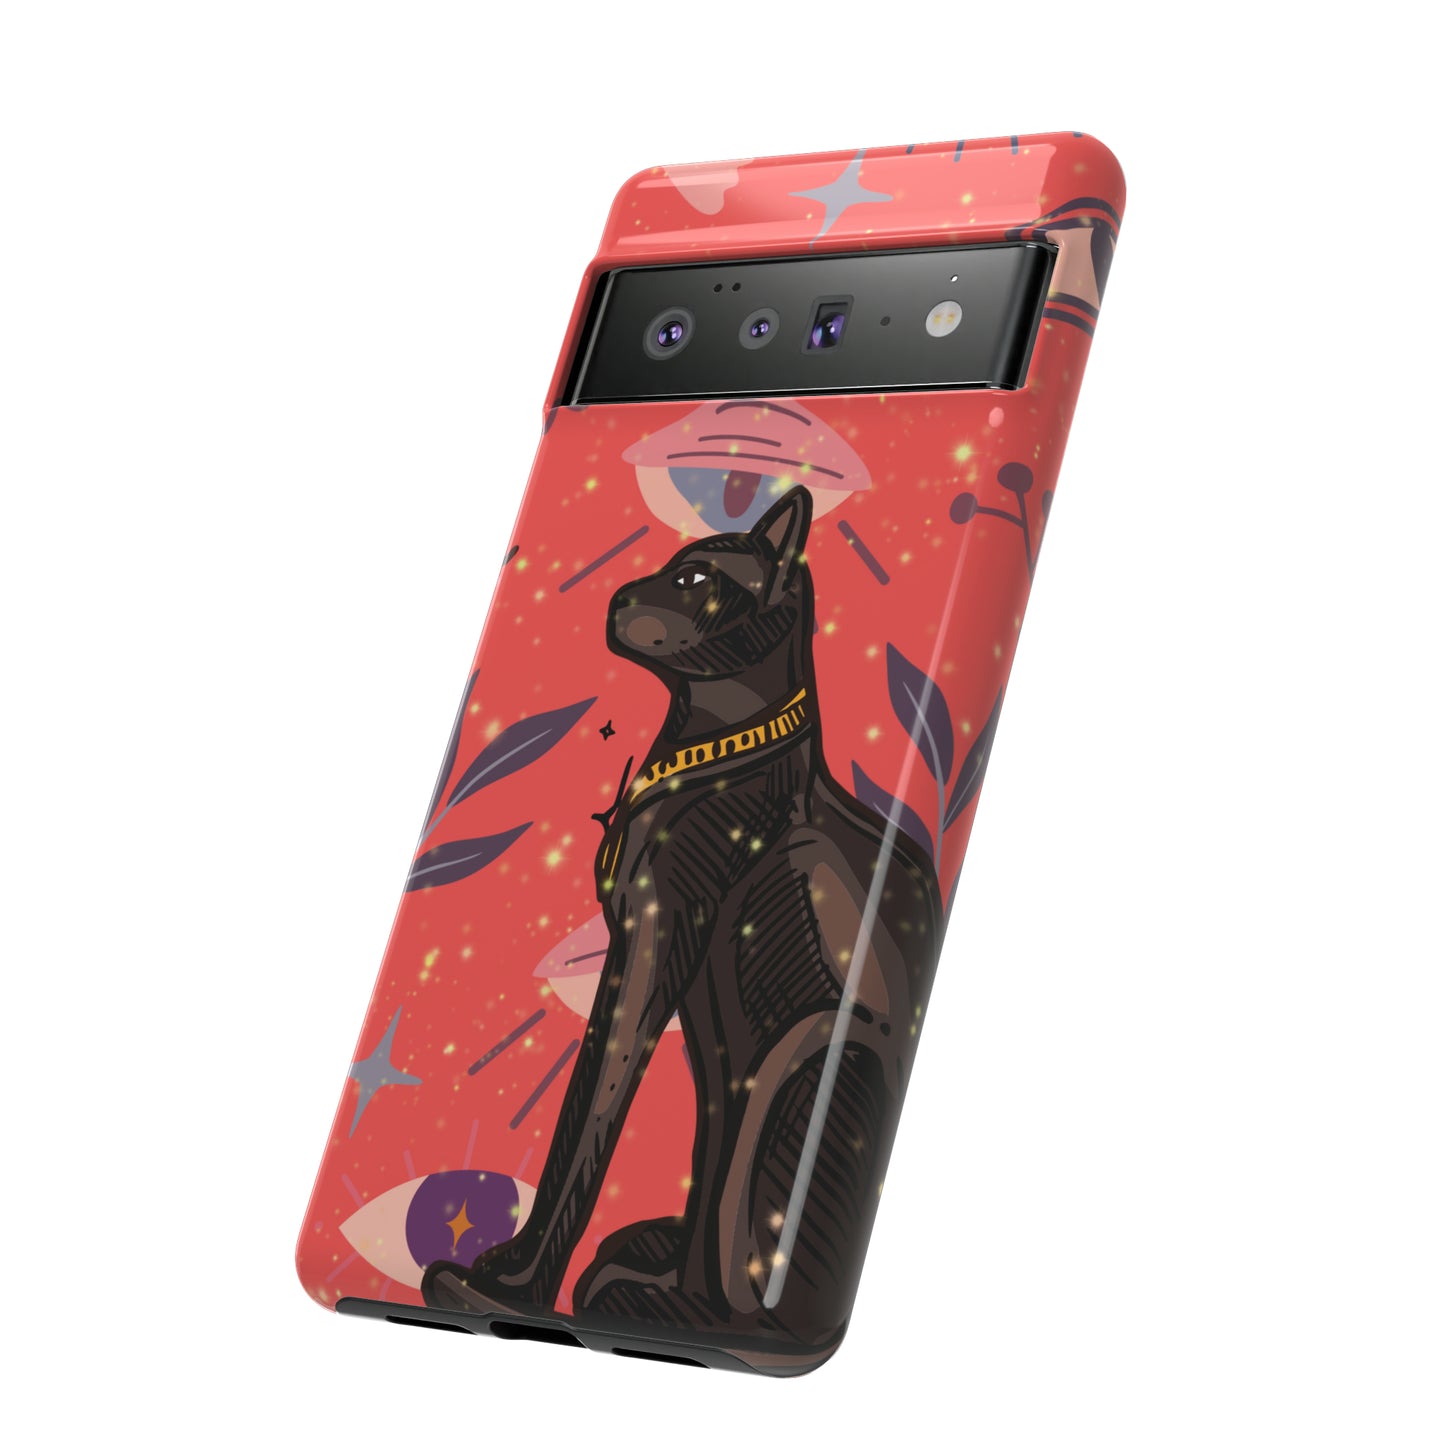 Magic Cat Phone Case Mystery Cat Phone Case Aesthetic Phone Case Cute Tough Cases Smartphone Protection Iphone, Google Pixel, Samsung Galaxy